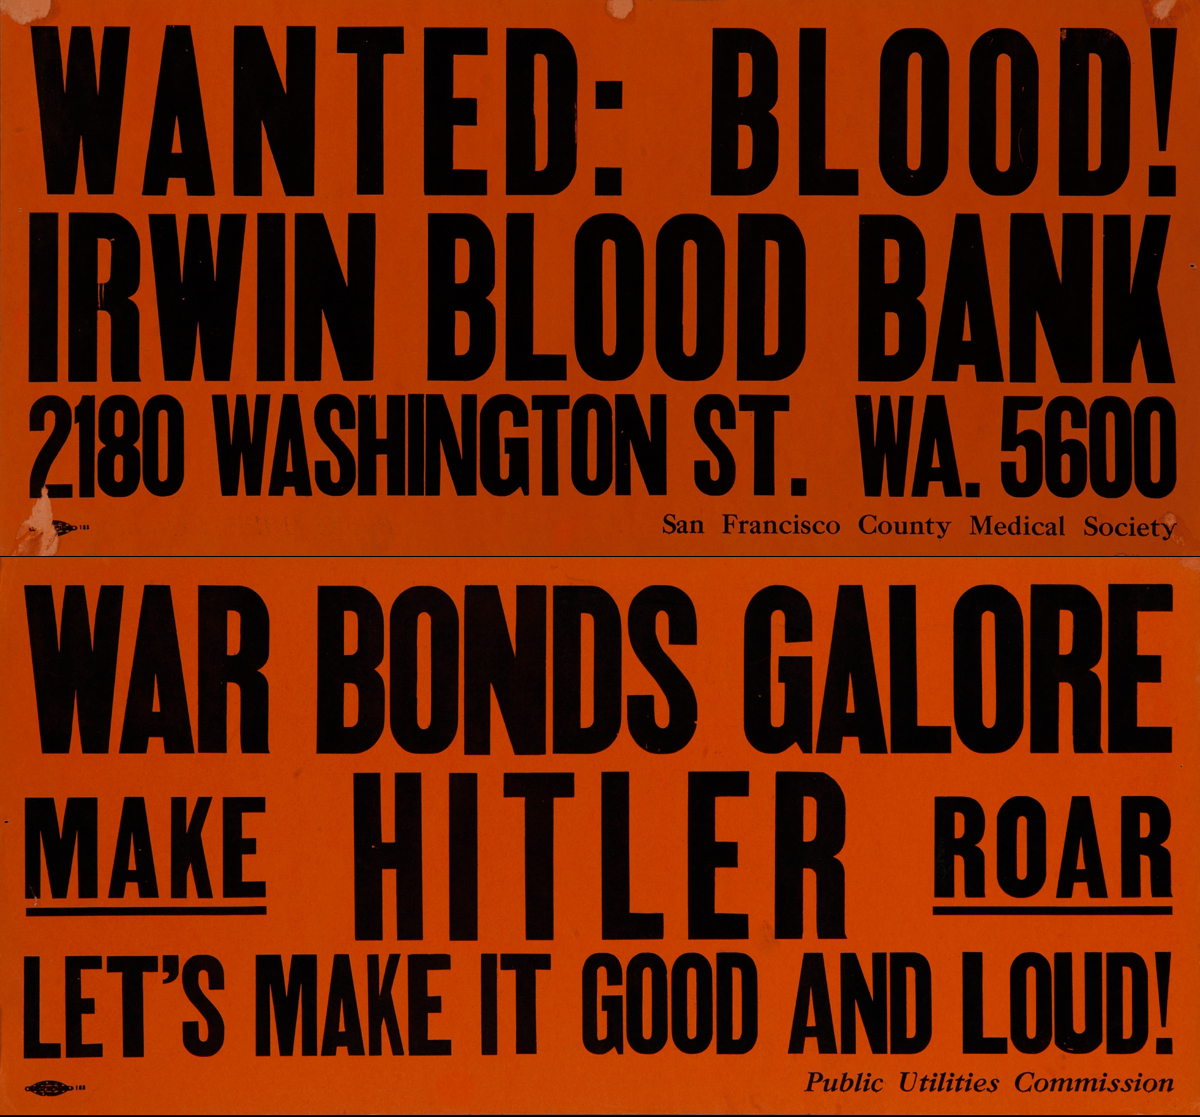 War Bond Galore Make Hitler Roar Let's Make it Good and Loud<br>2 Sided WWII Public Utilities Commision Poster